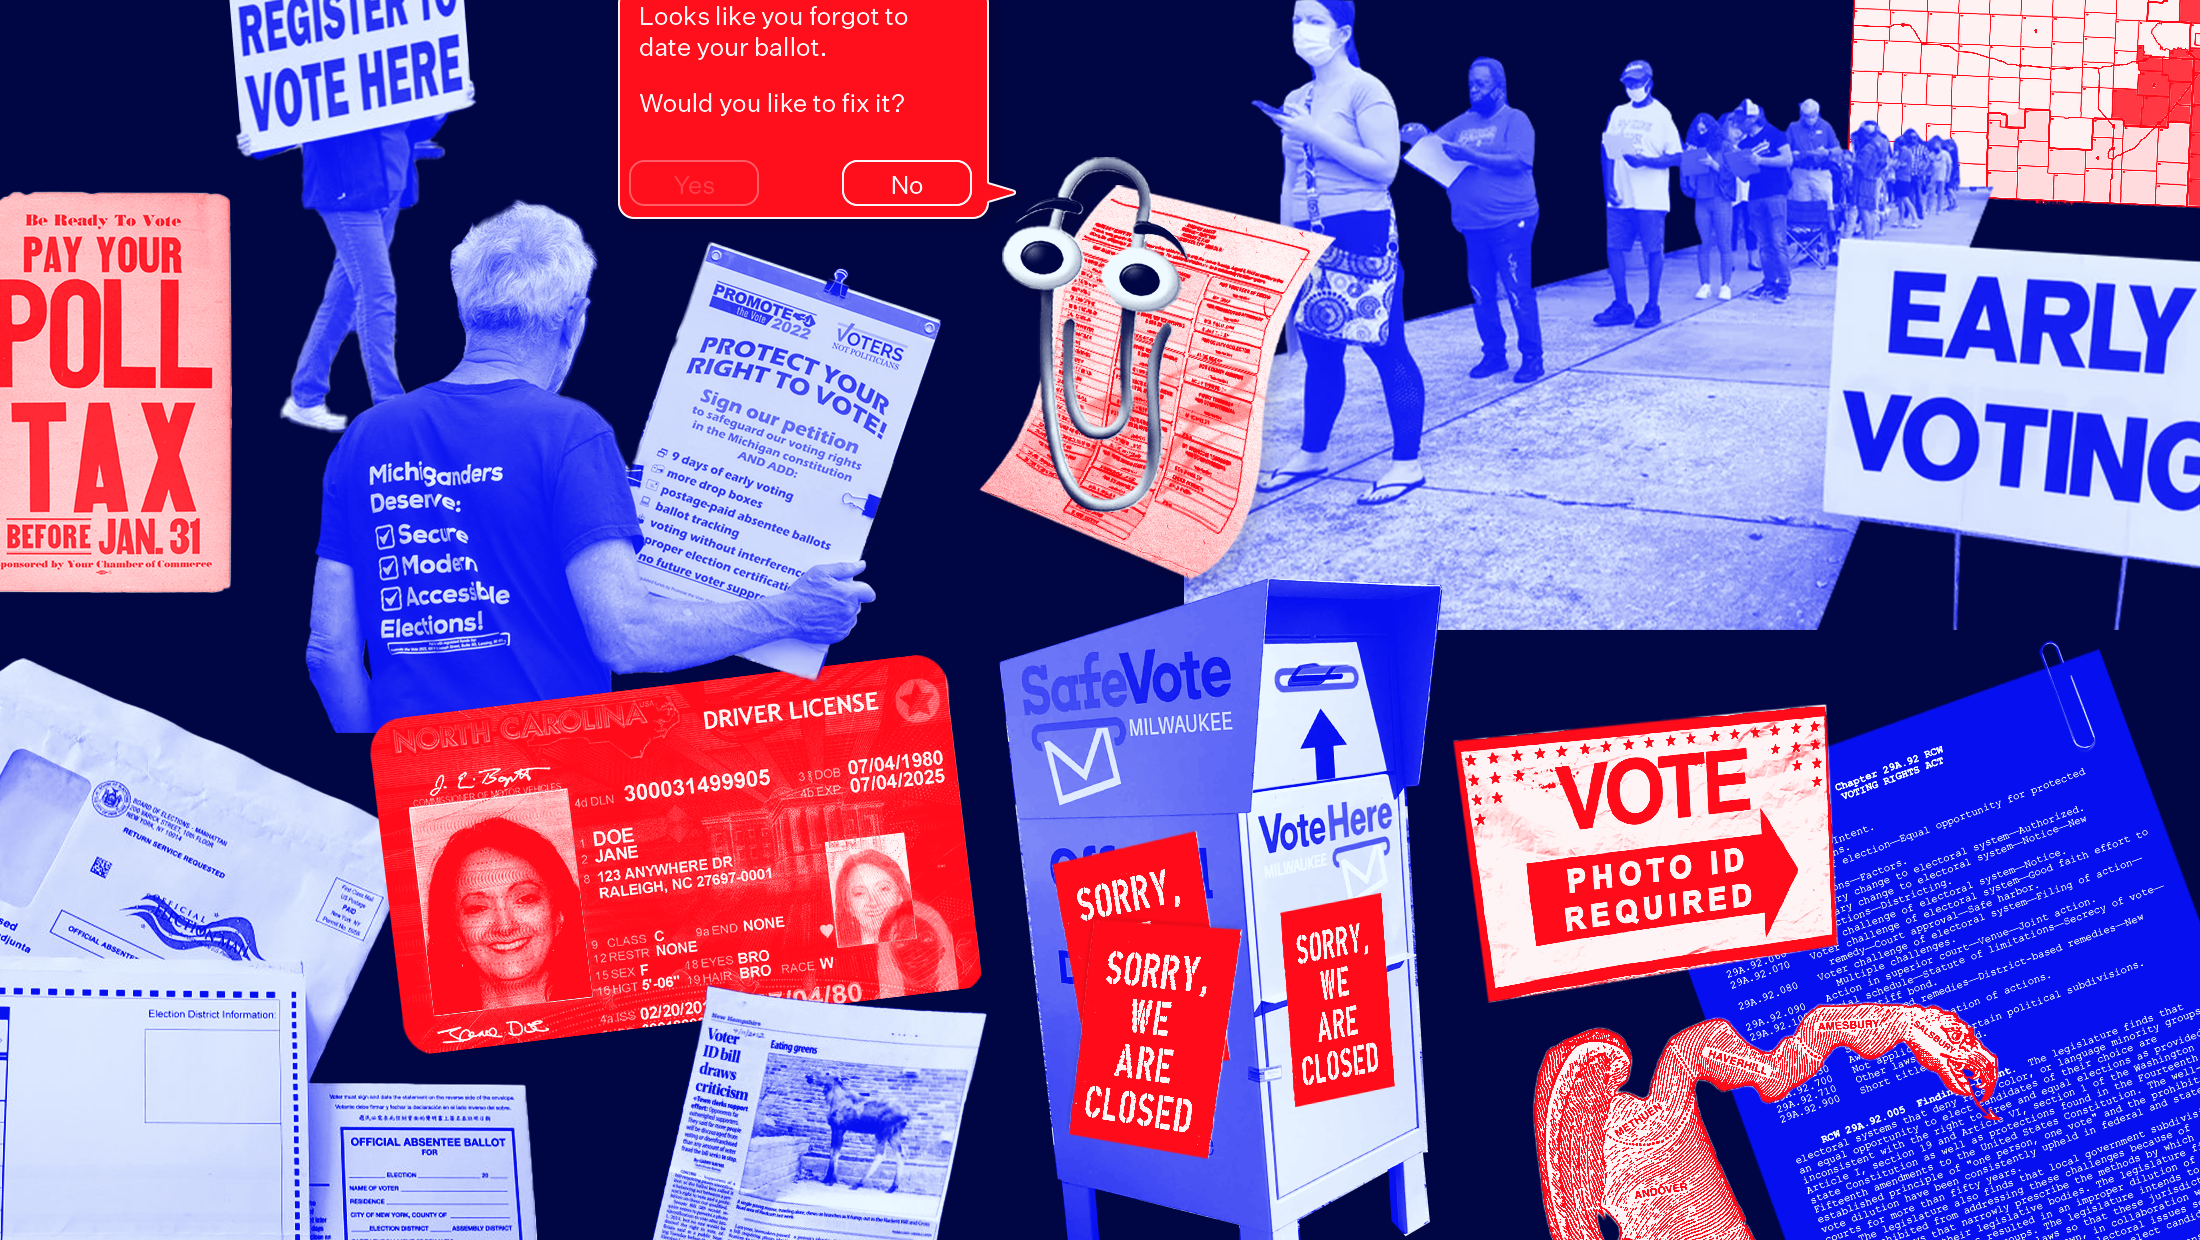 Mutiple objects colored in blue and red represetnting different aspects of voting, including photo IDs, the infamous gerrymandering cartoon, voters in line, drop box, mail-in ballots and more.